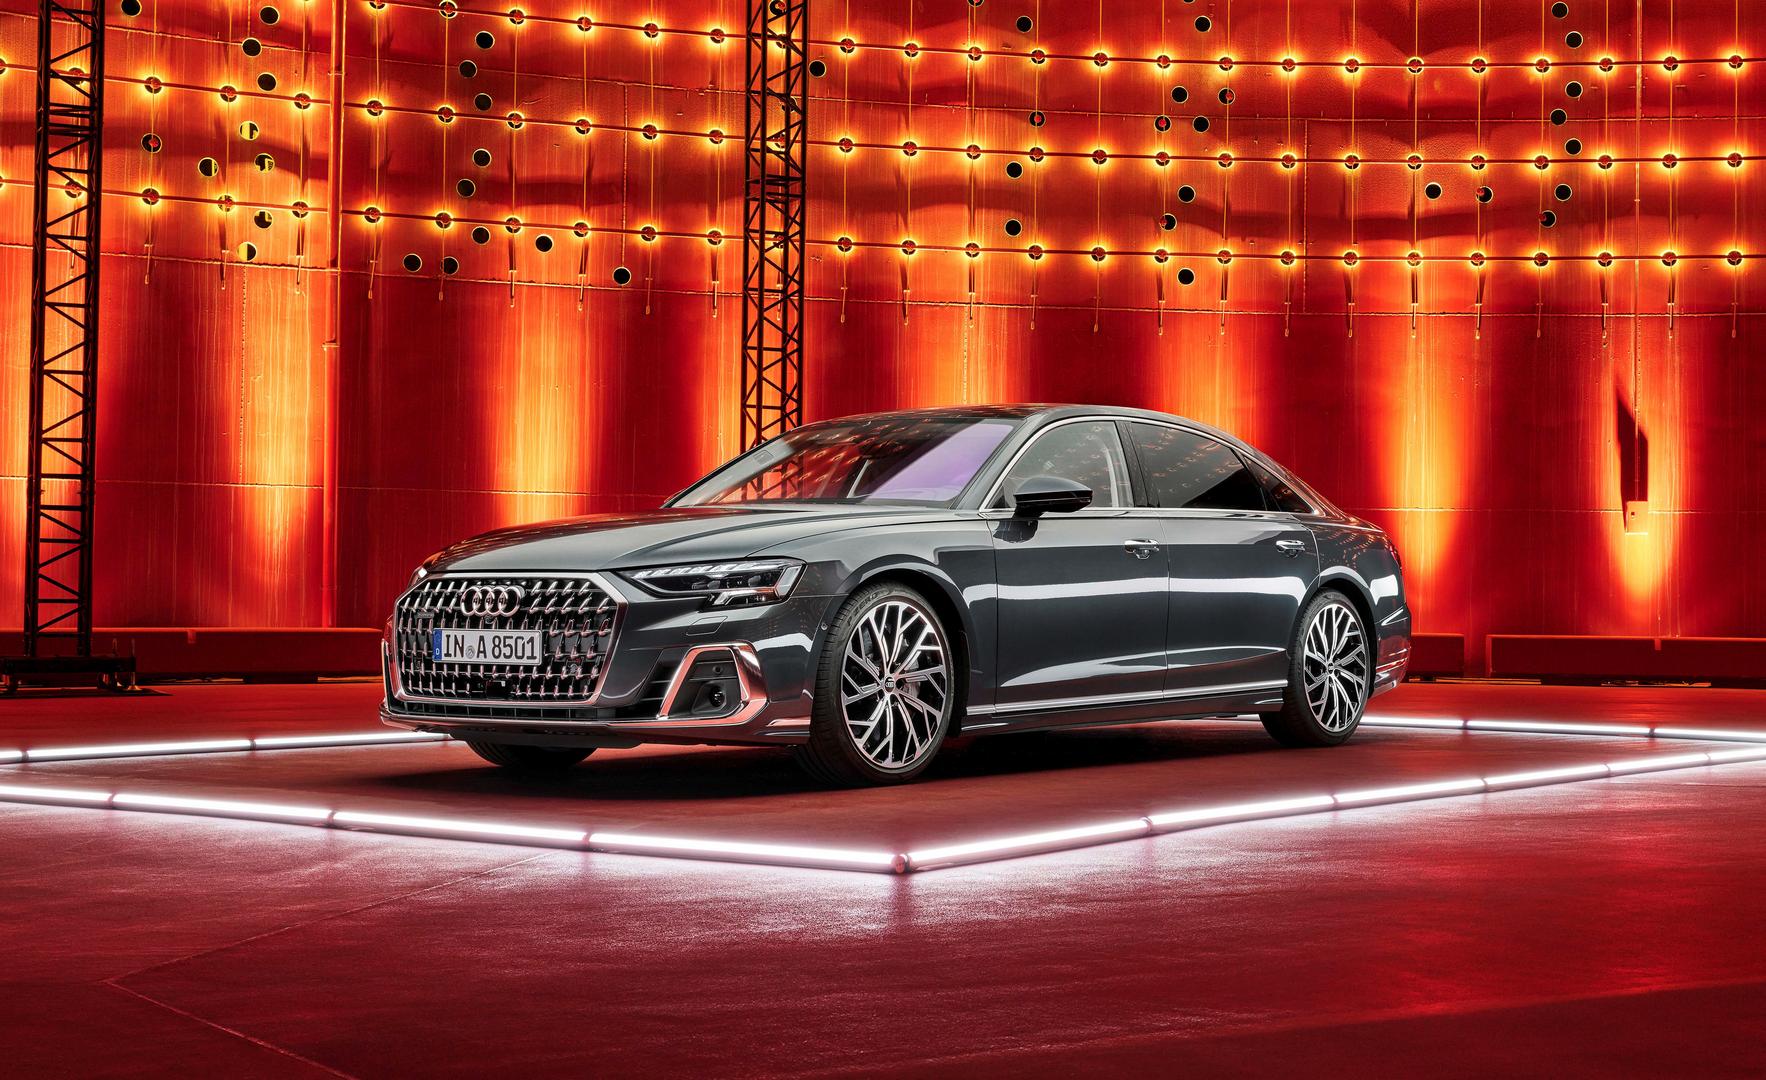 New Audi A8 luxury car unveiled